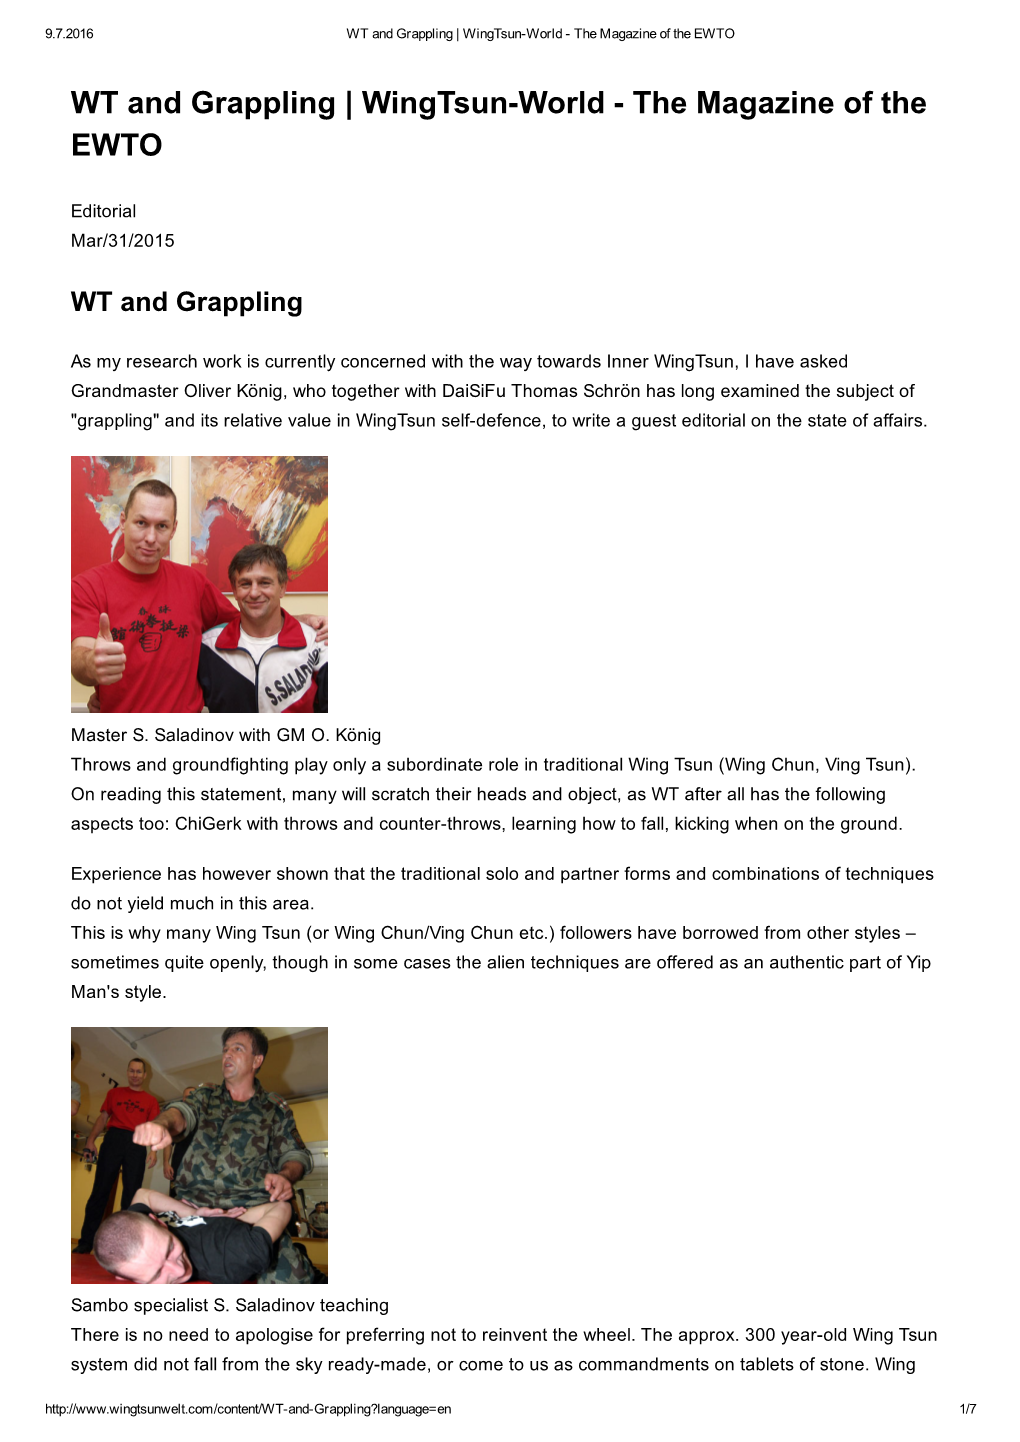 WT and Grappling | Wingtsunworld the Magazine of the EWTO